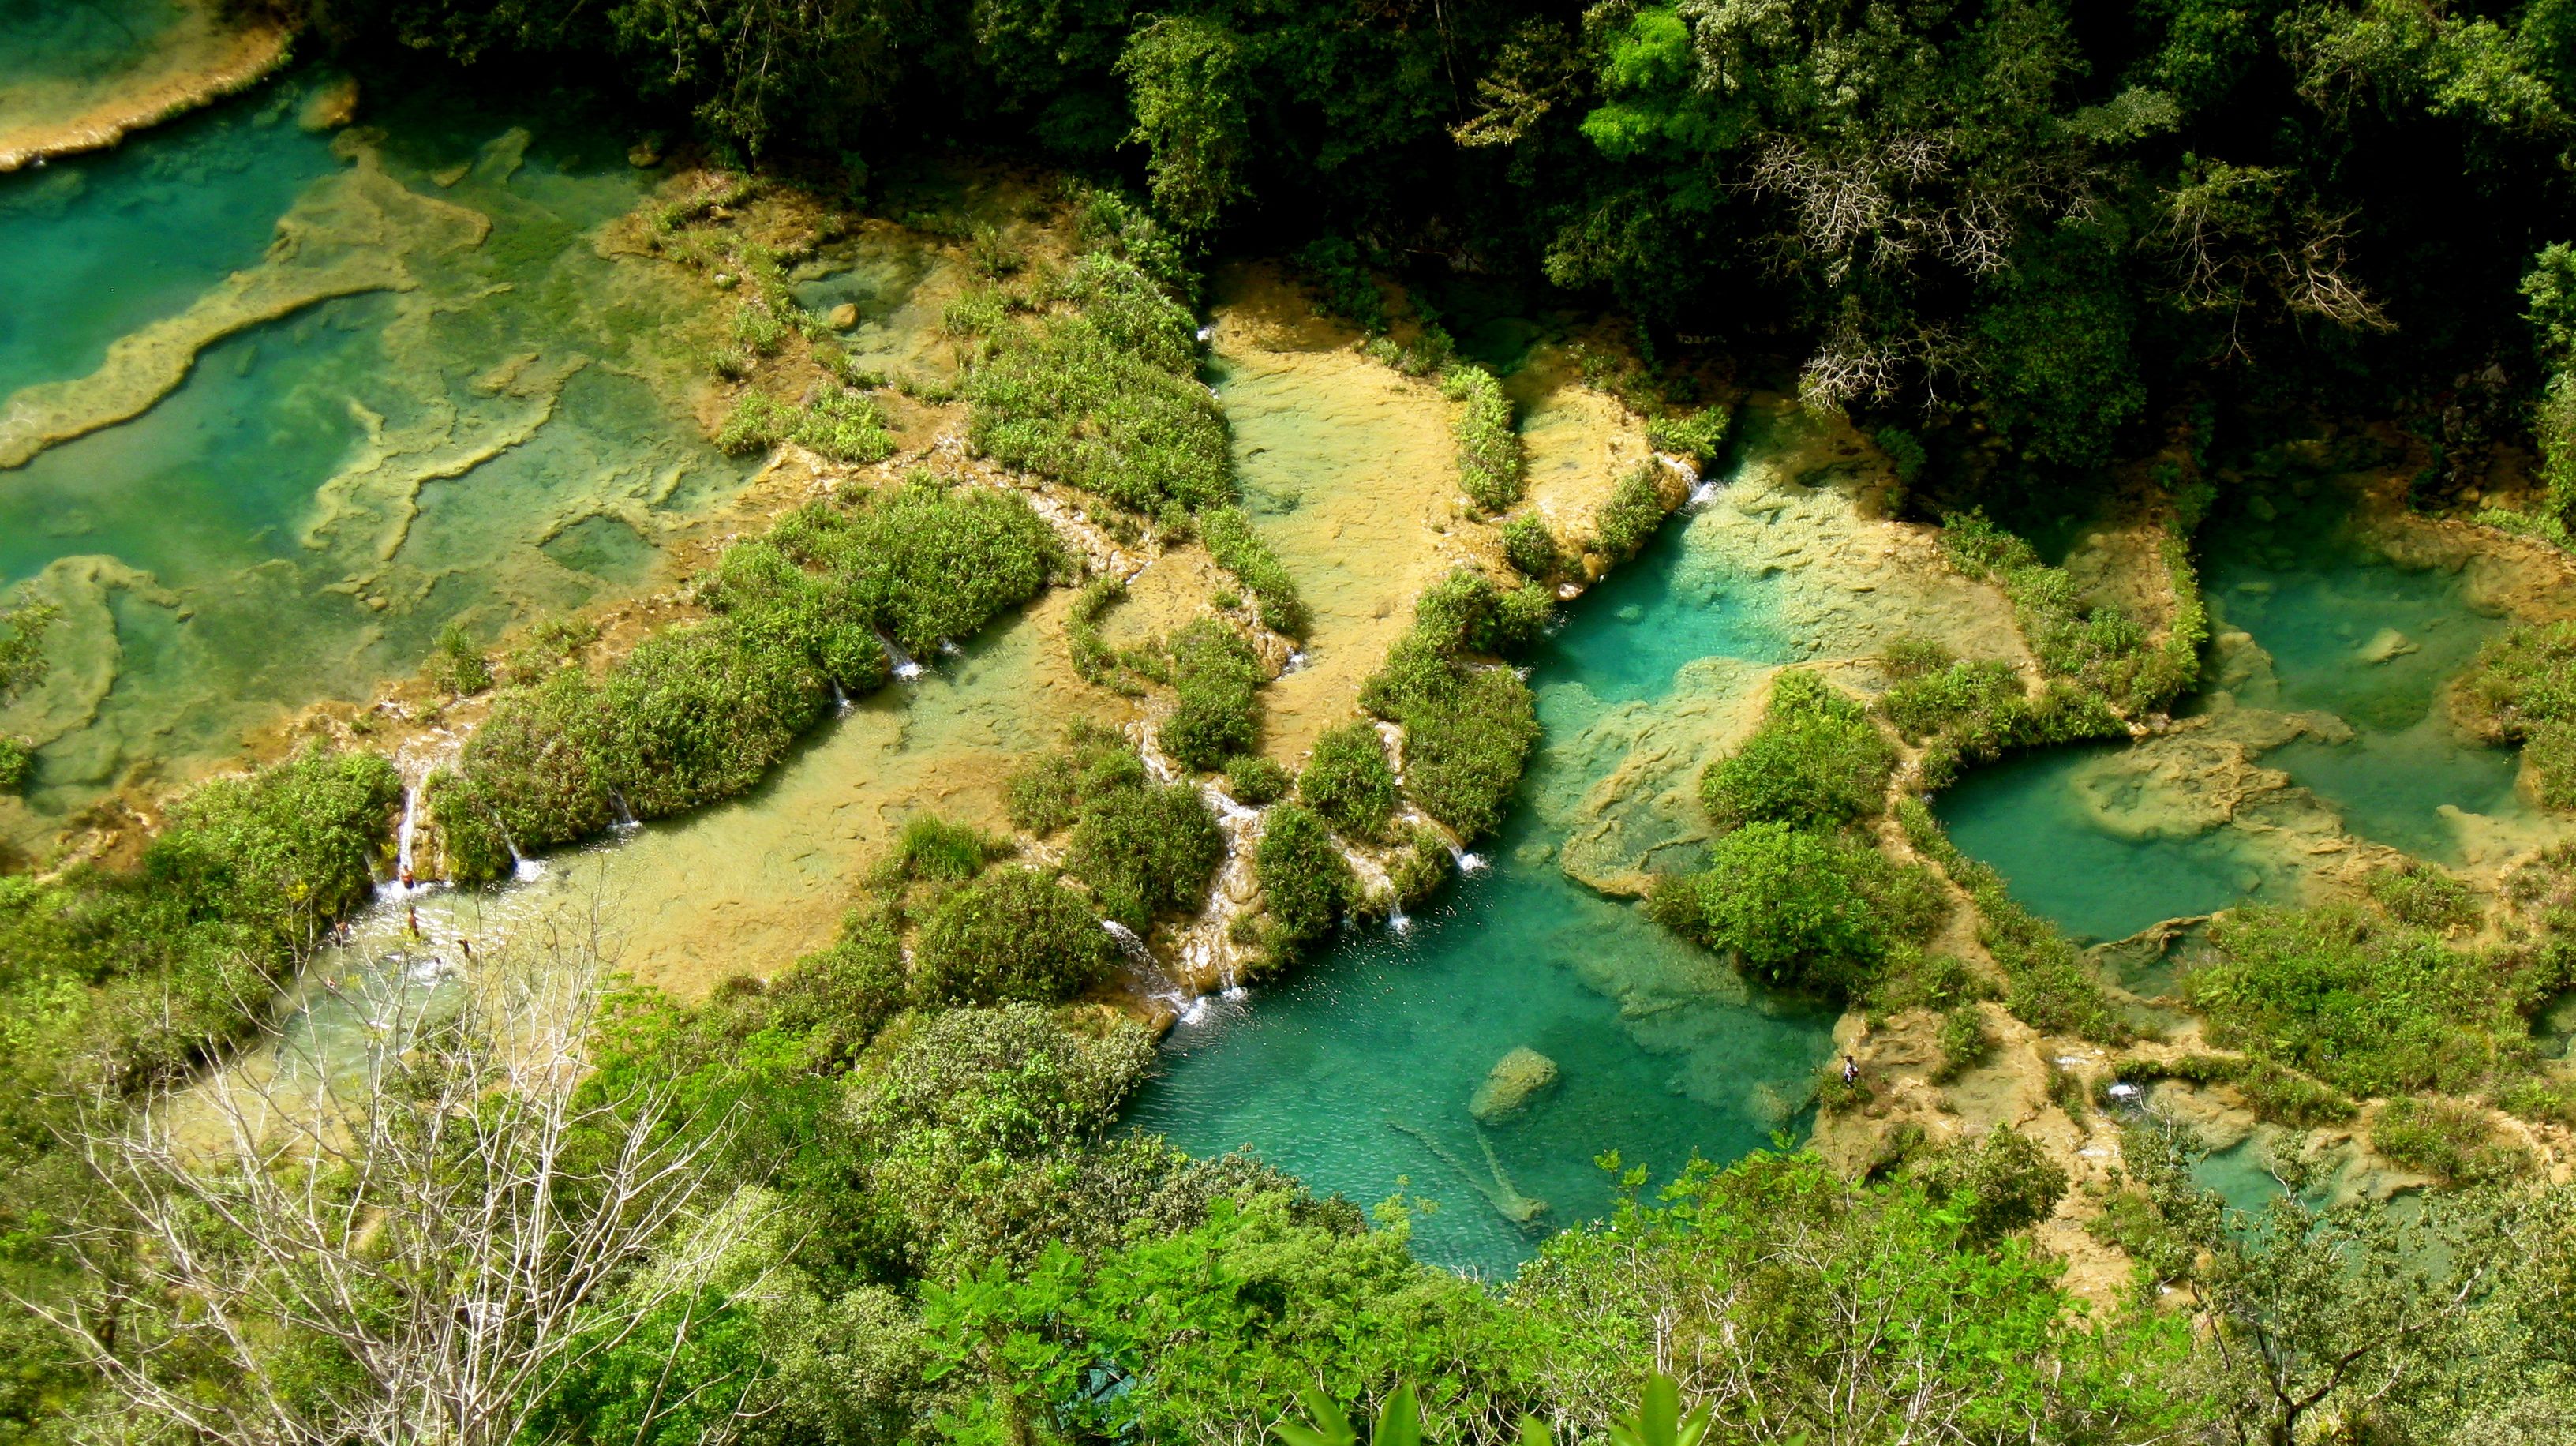 Semuc Champey is a natural wonder tucked away in the mountains of an isolated jungle in Guatemala